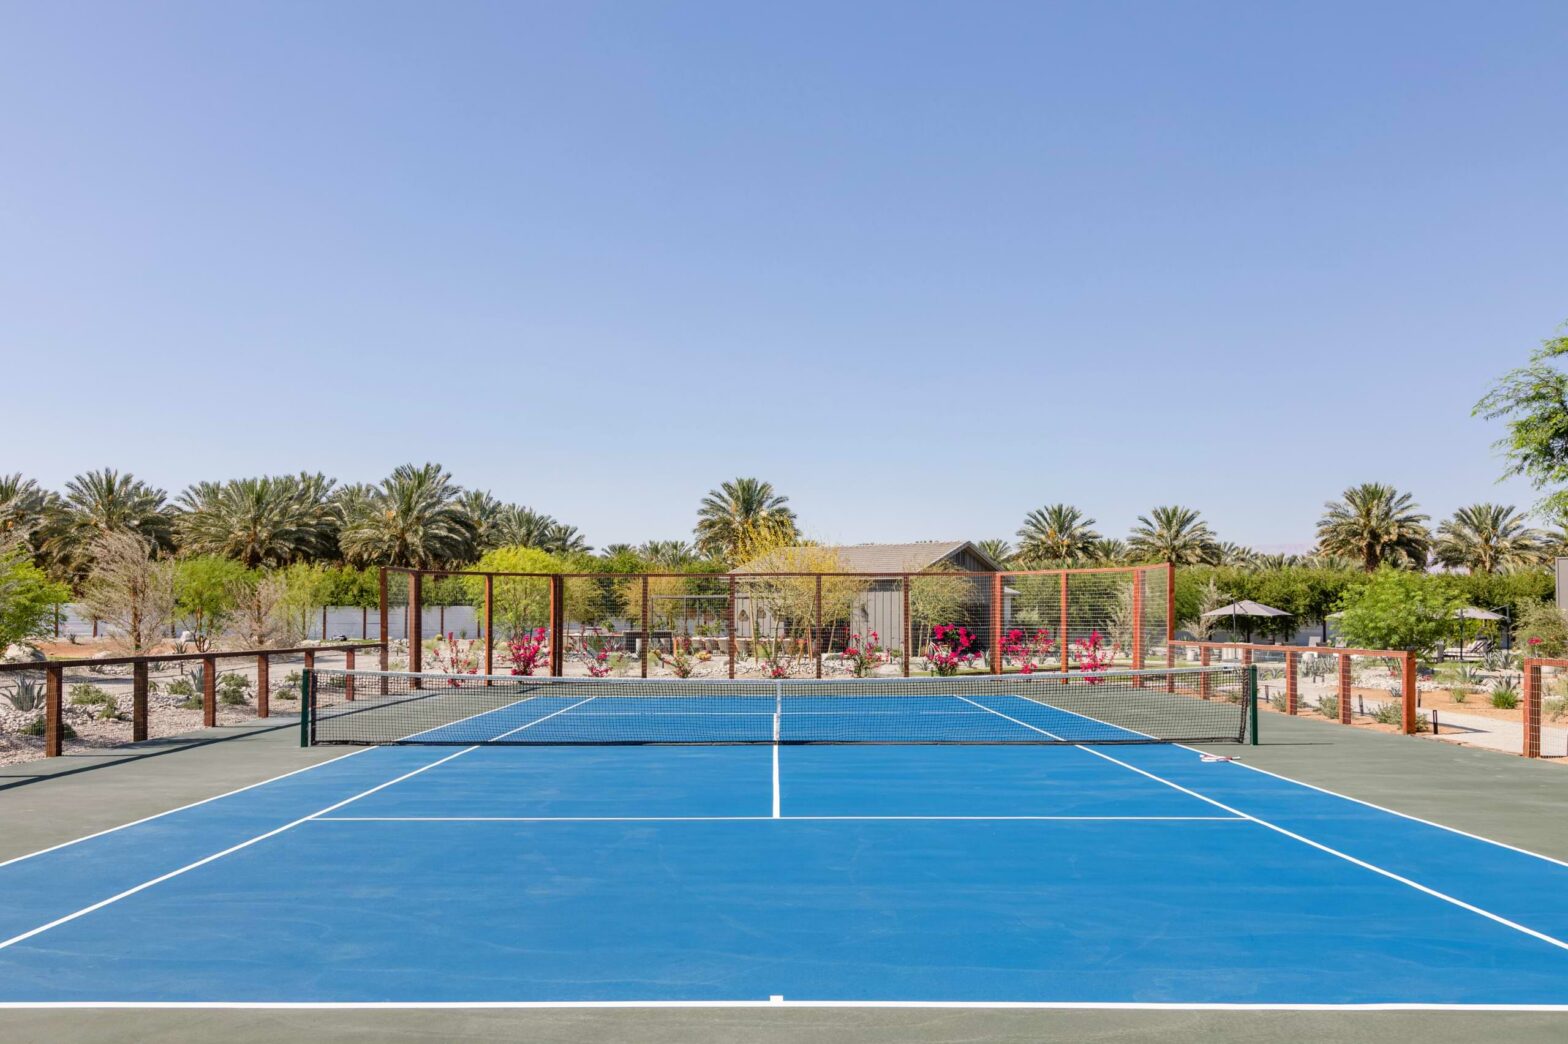 A wide shot of a blue tennis court with palm trees in the background